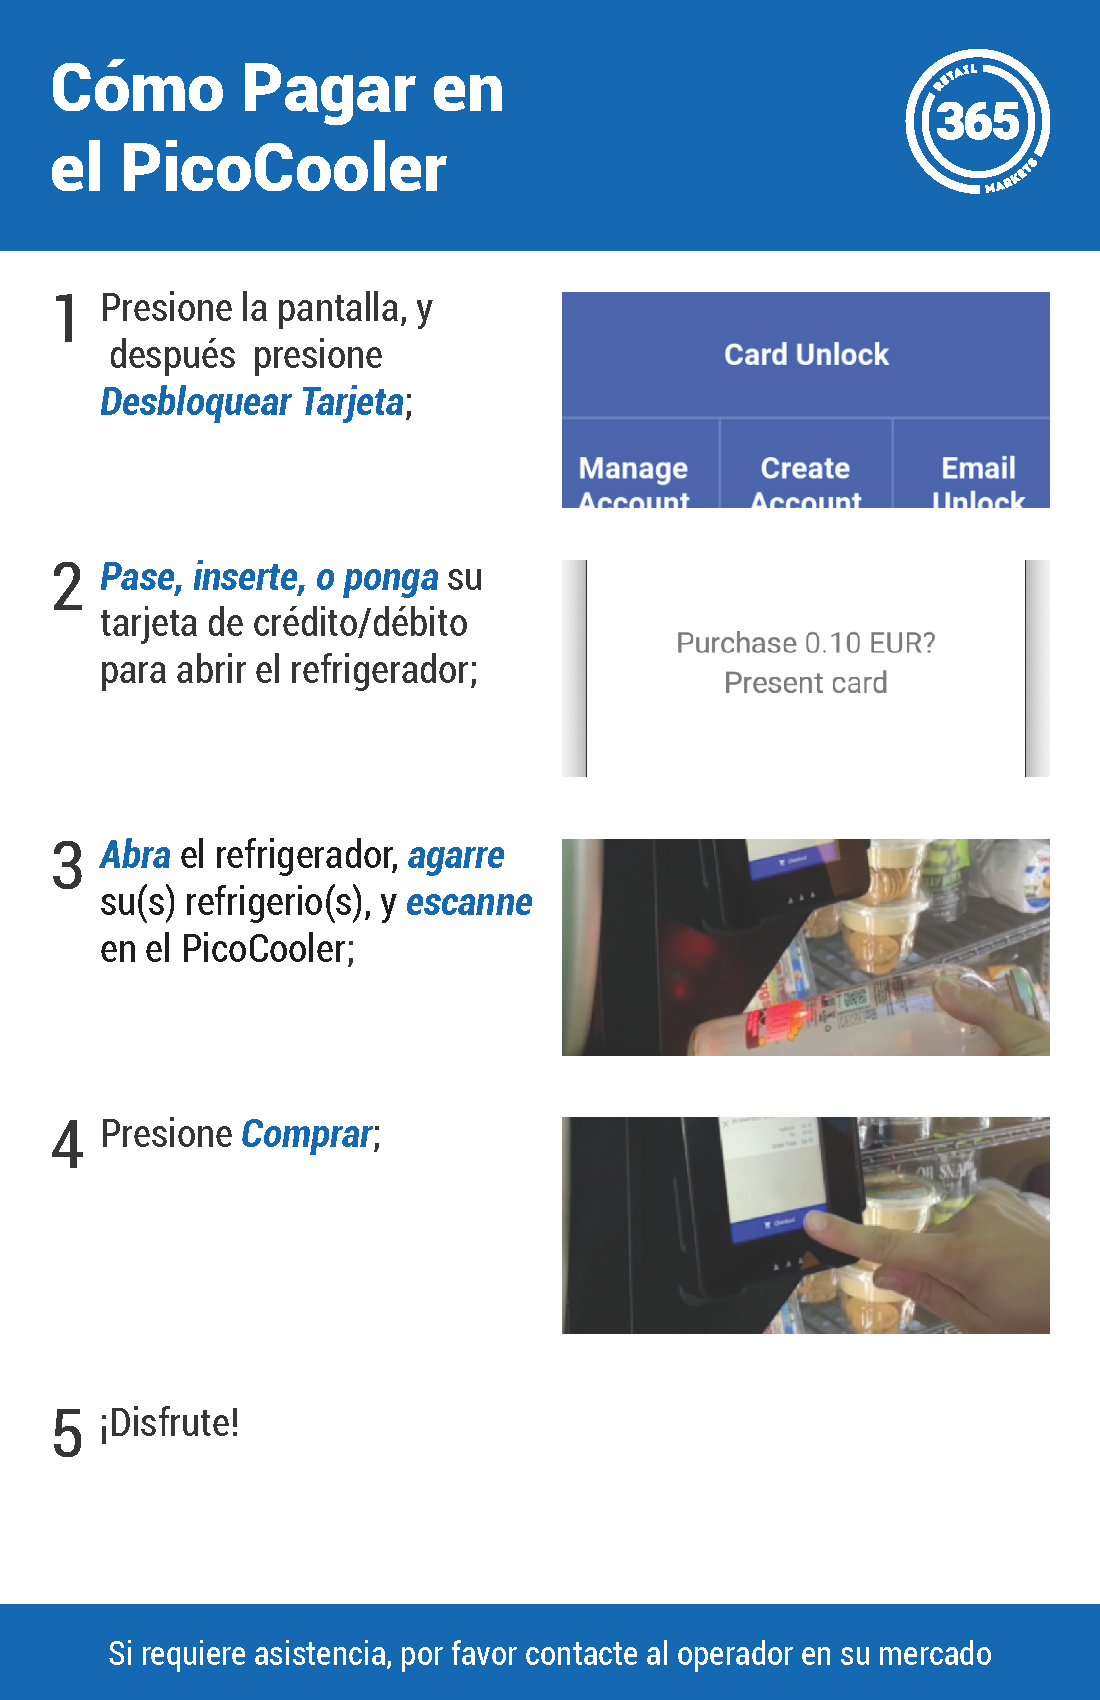 WingCards-PicoCooler-HowToCheckout-International-Locked-Spanish.png